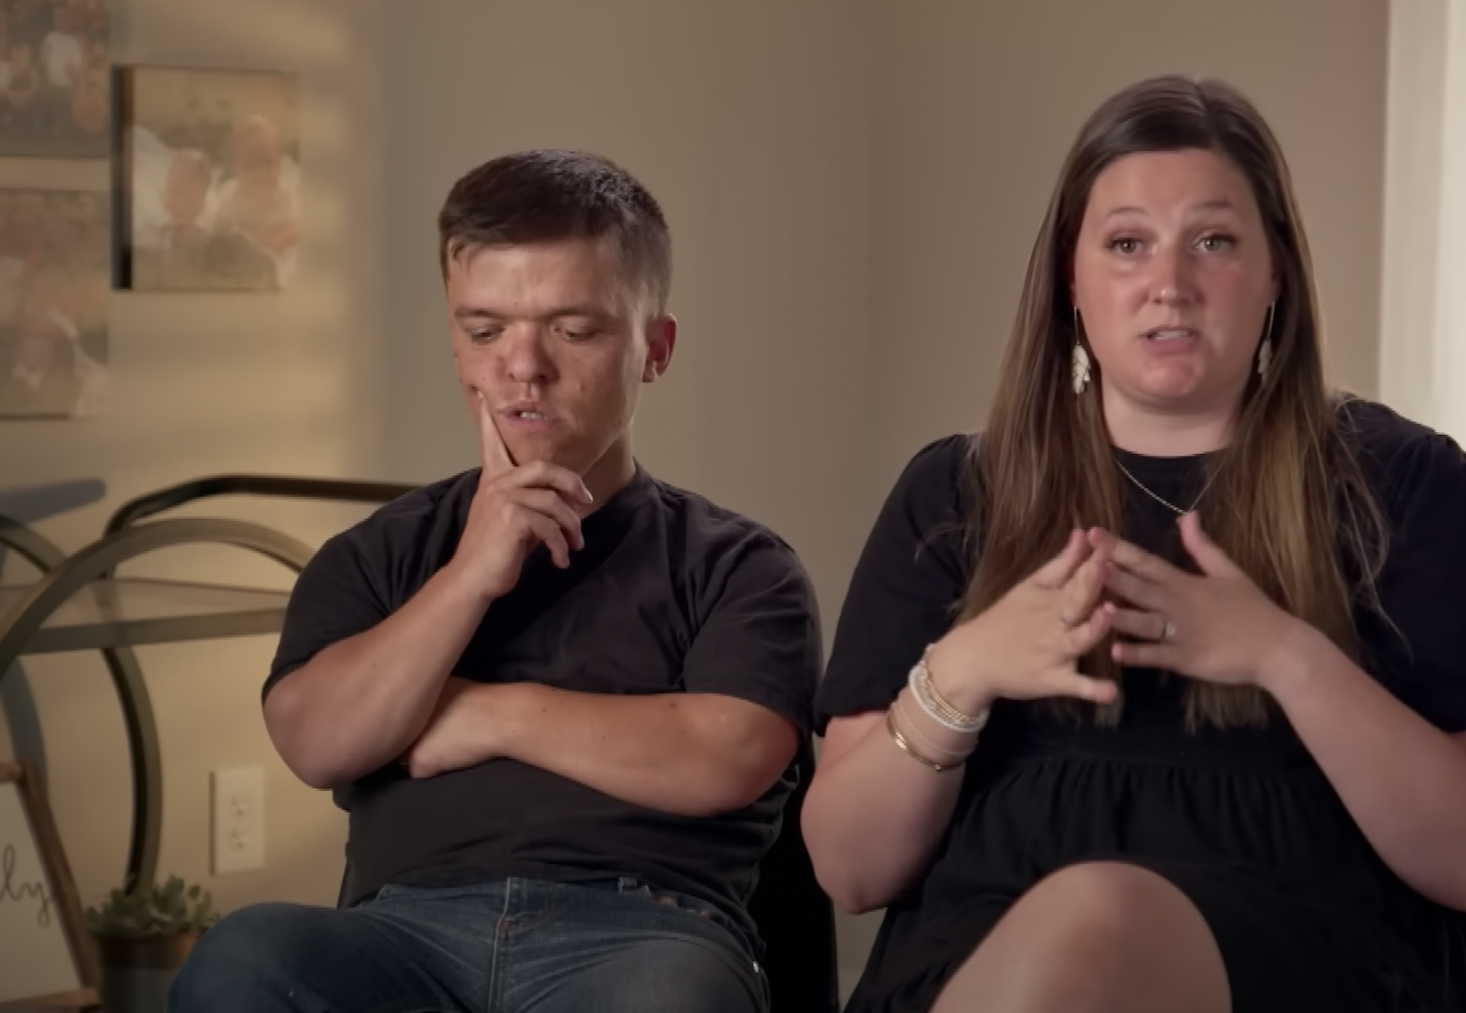 Zach and Tori Roloff sitting next to each other and talking in 'Little People, Big World'